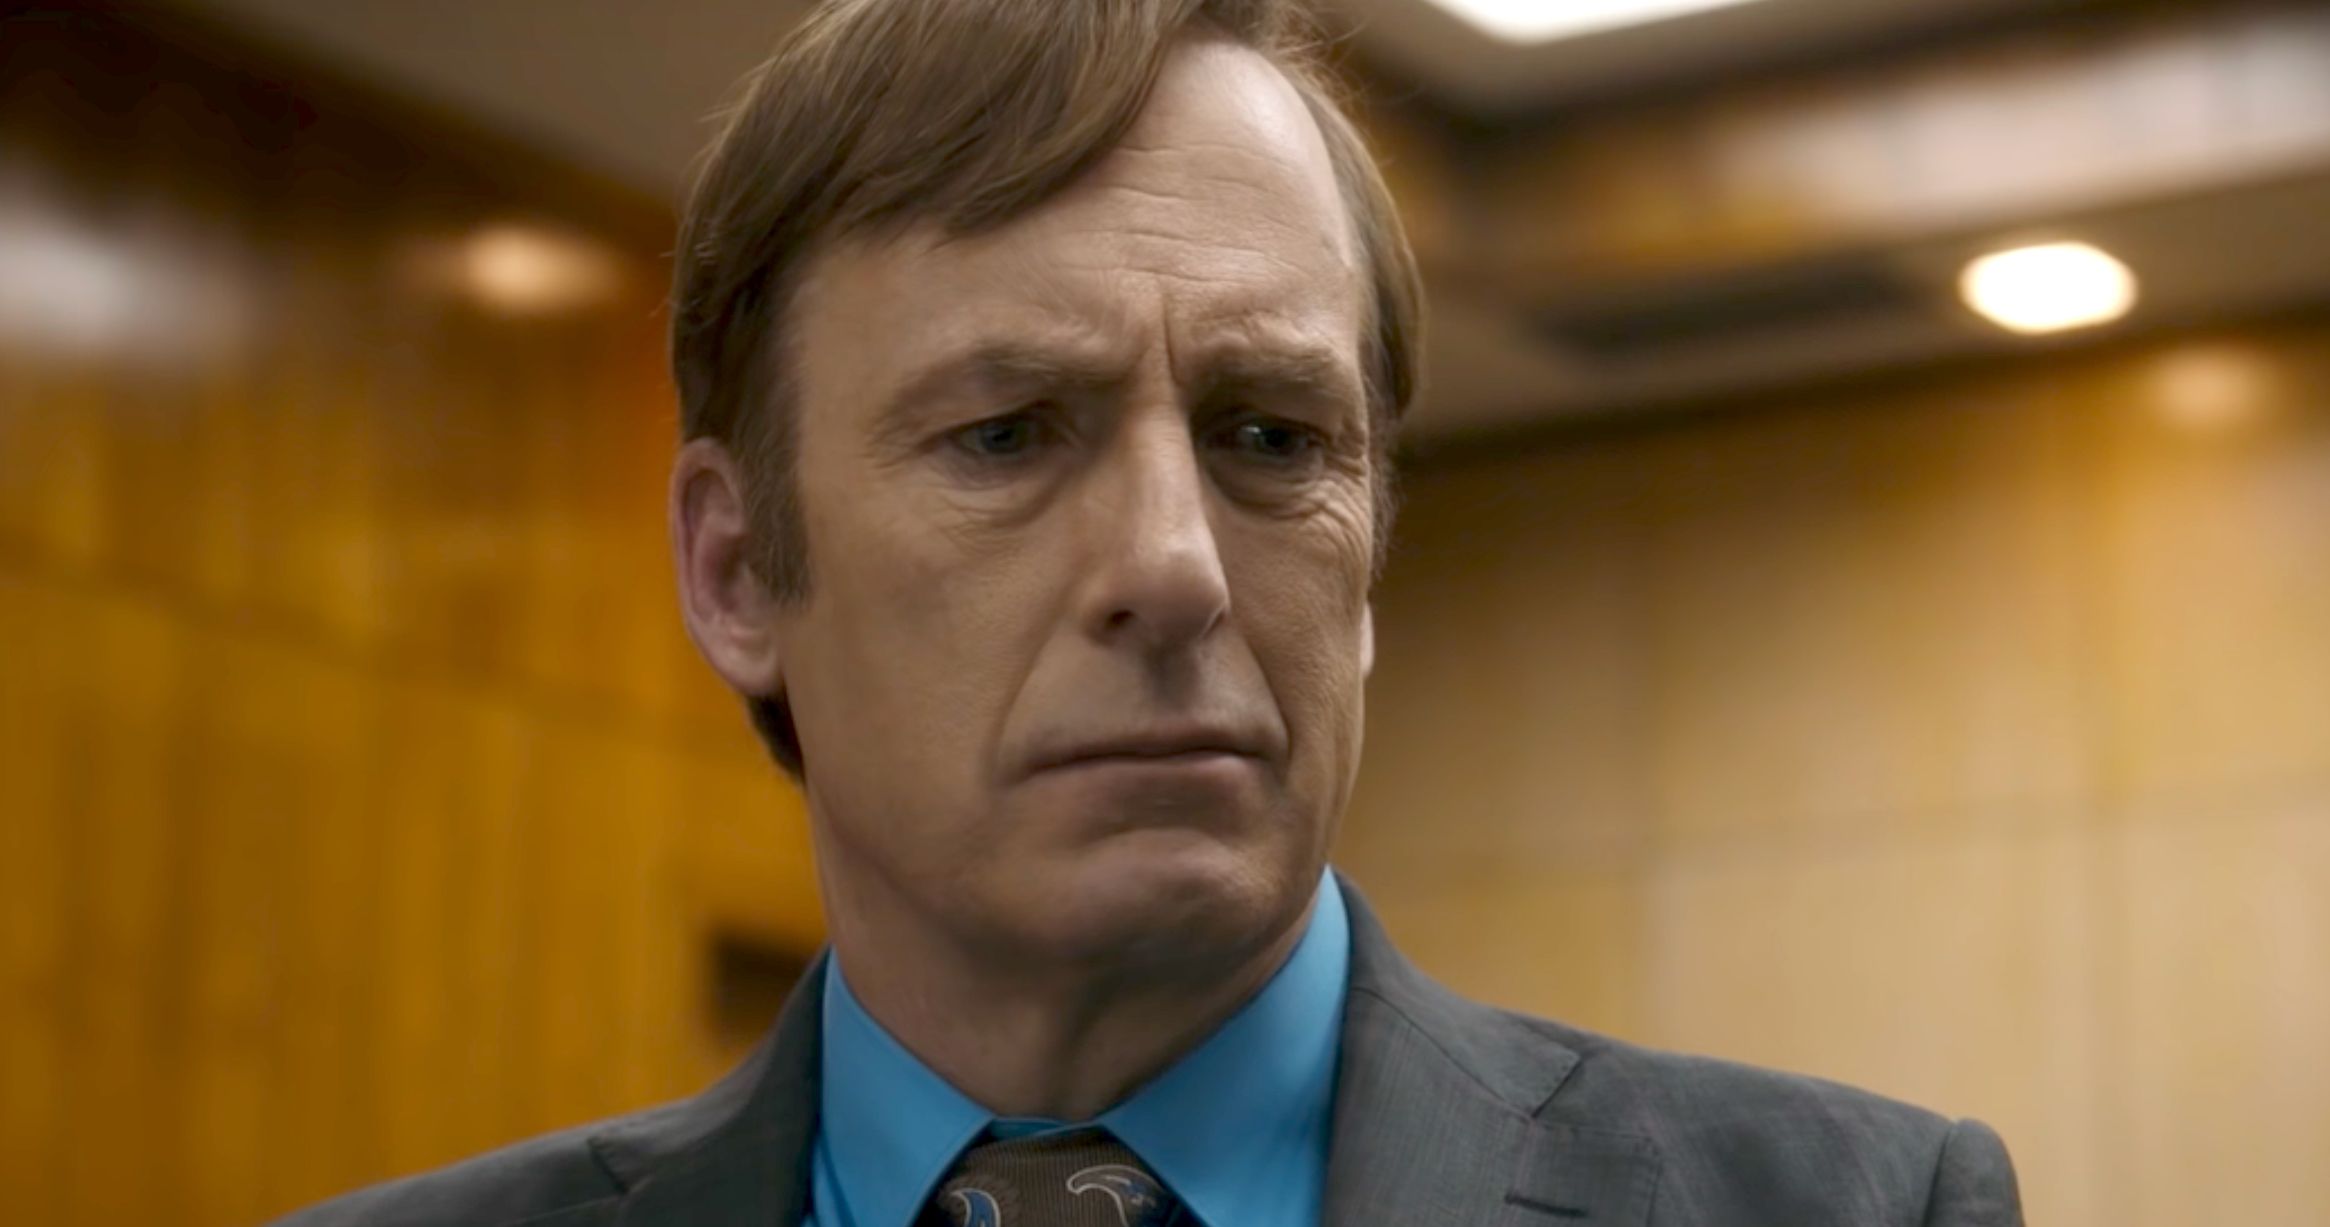 Bob Odenkirk Rushed to Hospital After Collapsing on Better Call Saul Set